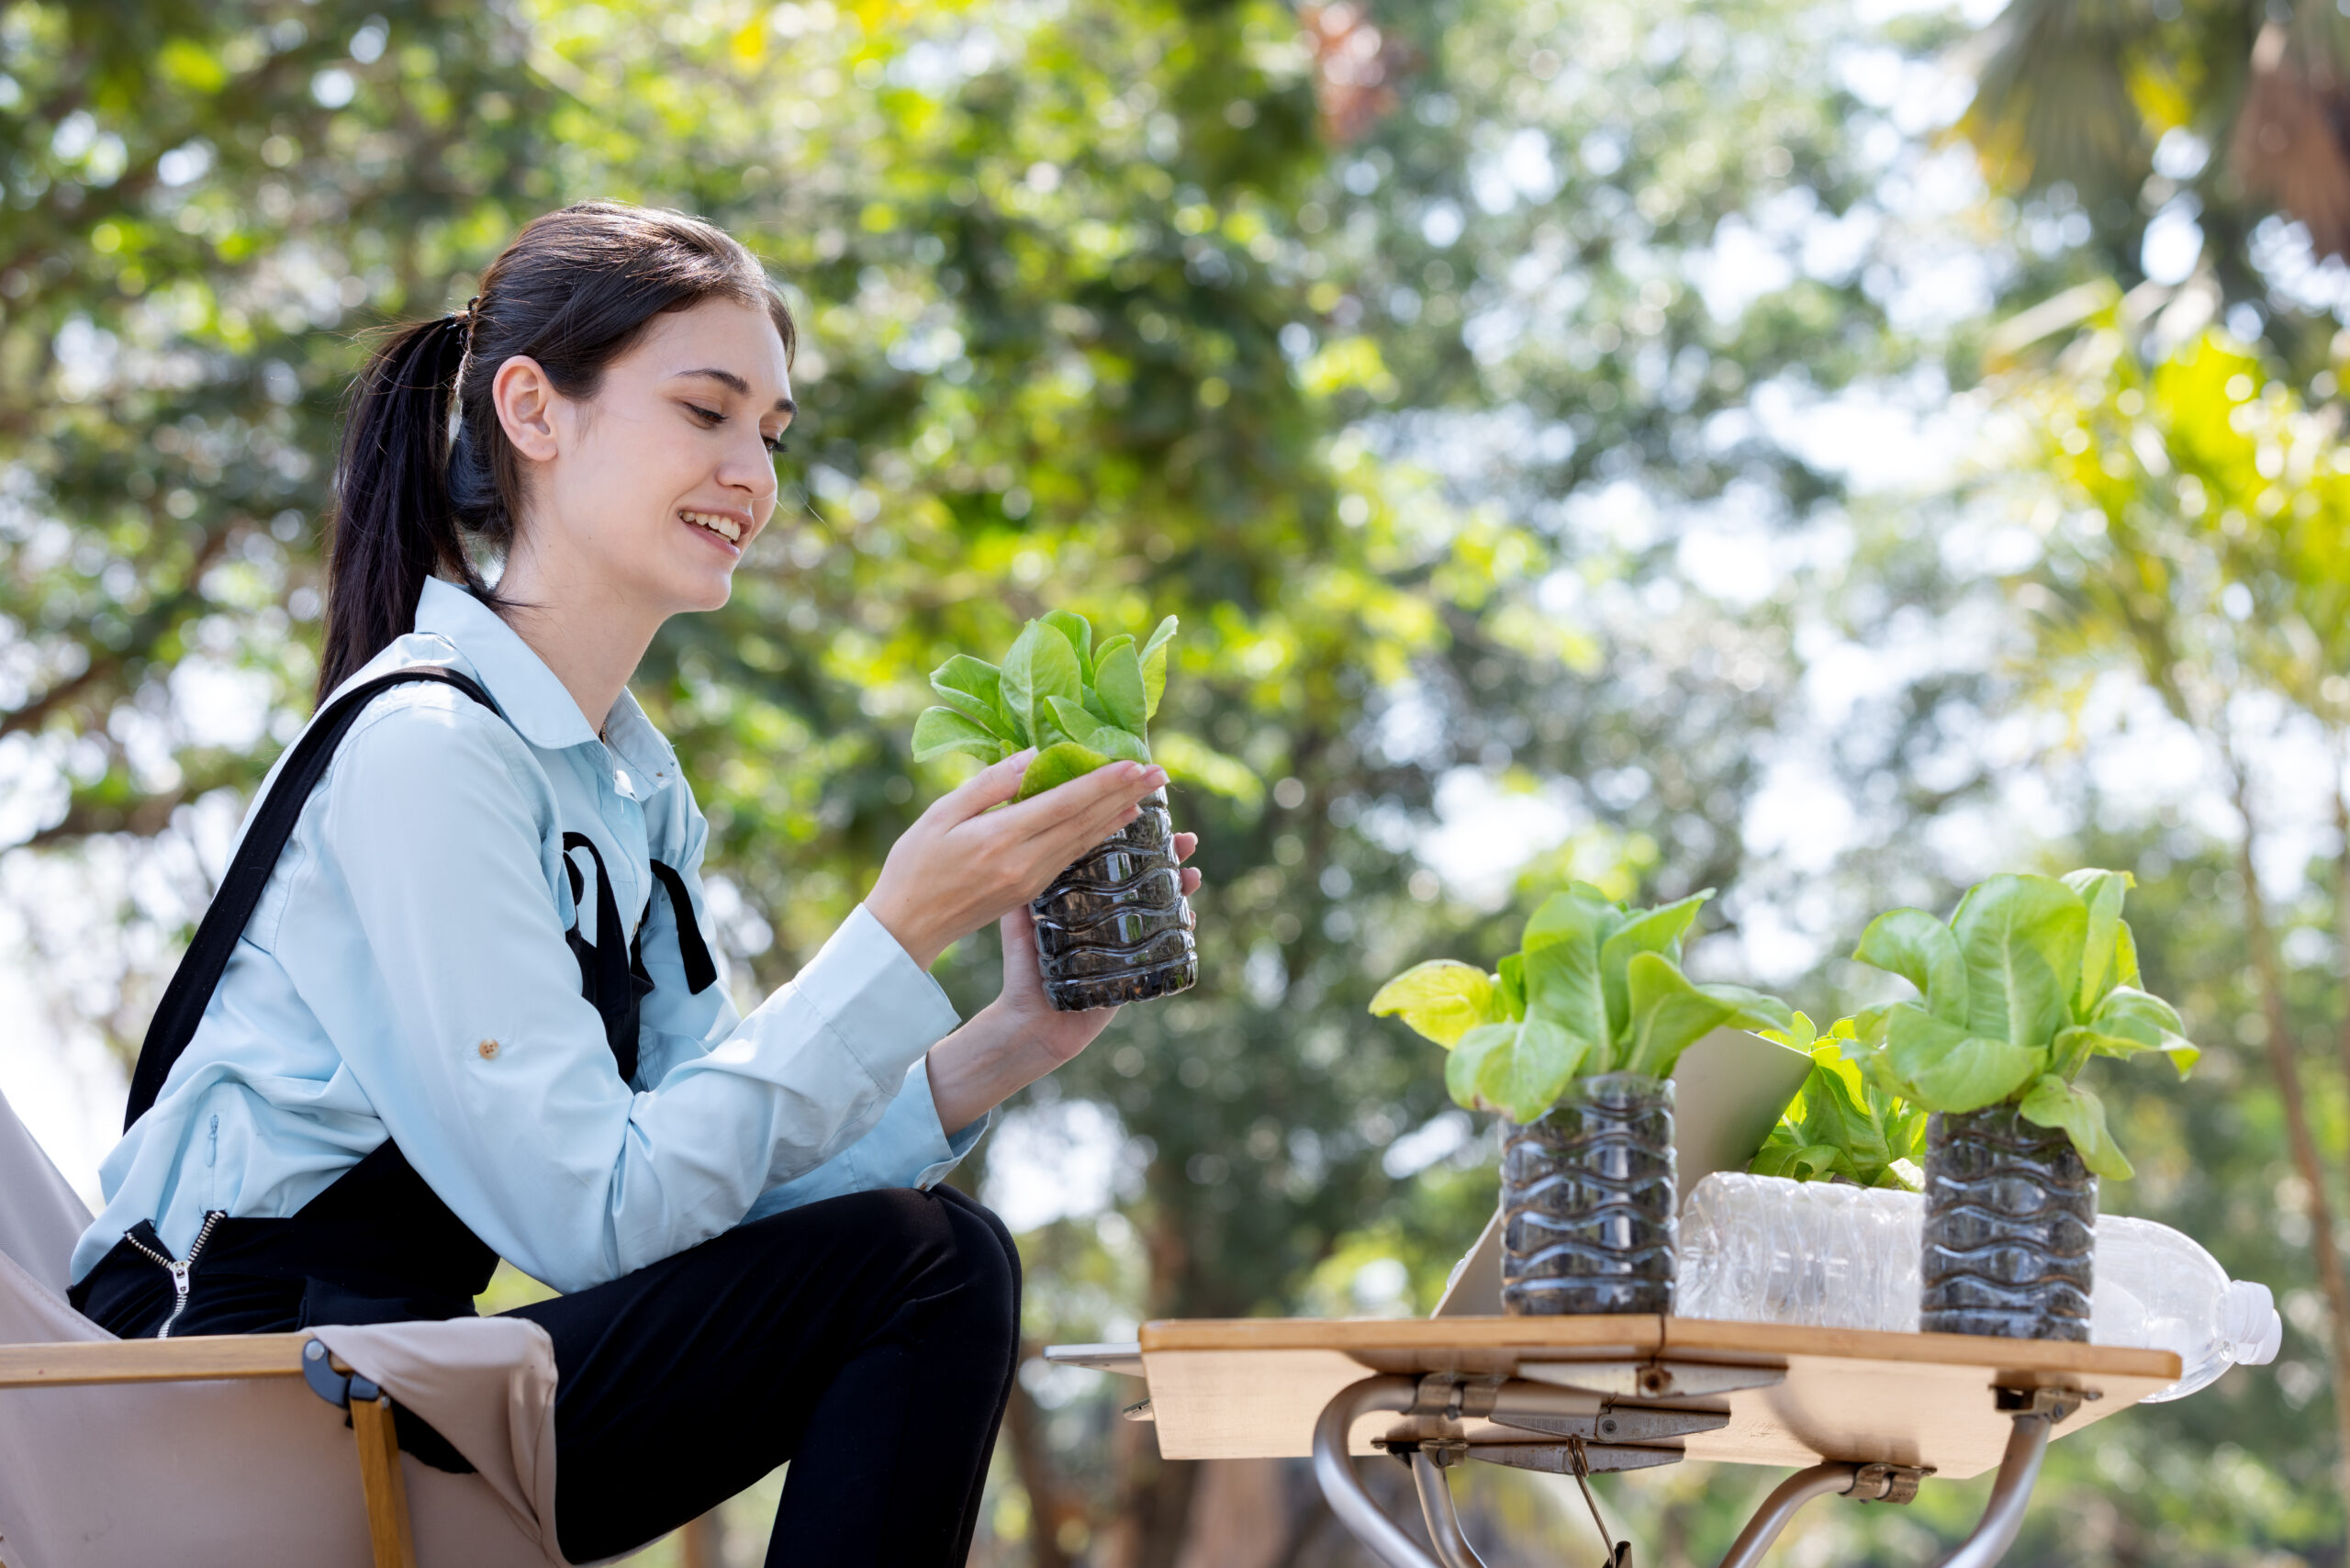 A young woman smiles as she examines a small, leafy plant in a recycled bottle planter. She's outdoors, with trees in the background, adding a lush green to the scene. The plant is one of several on a wooden cart, suggesting a mobile gardening project.